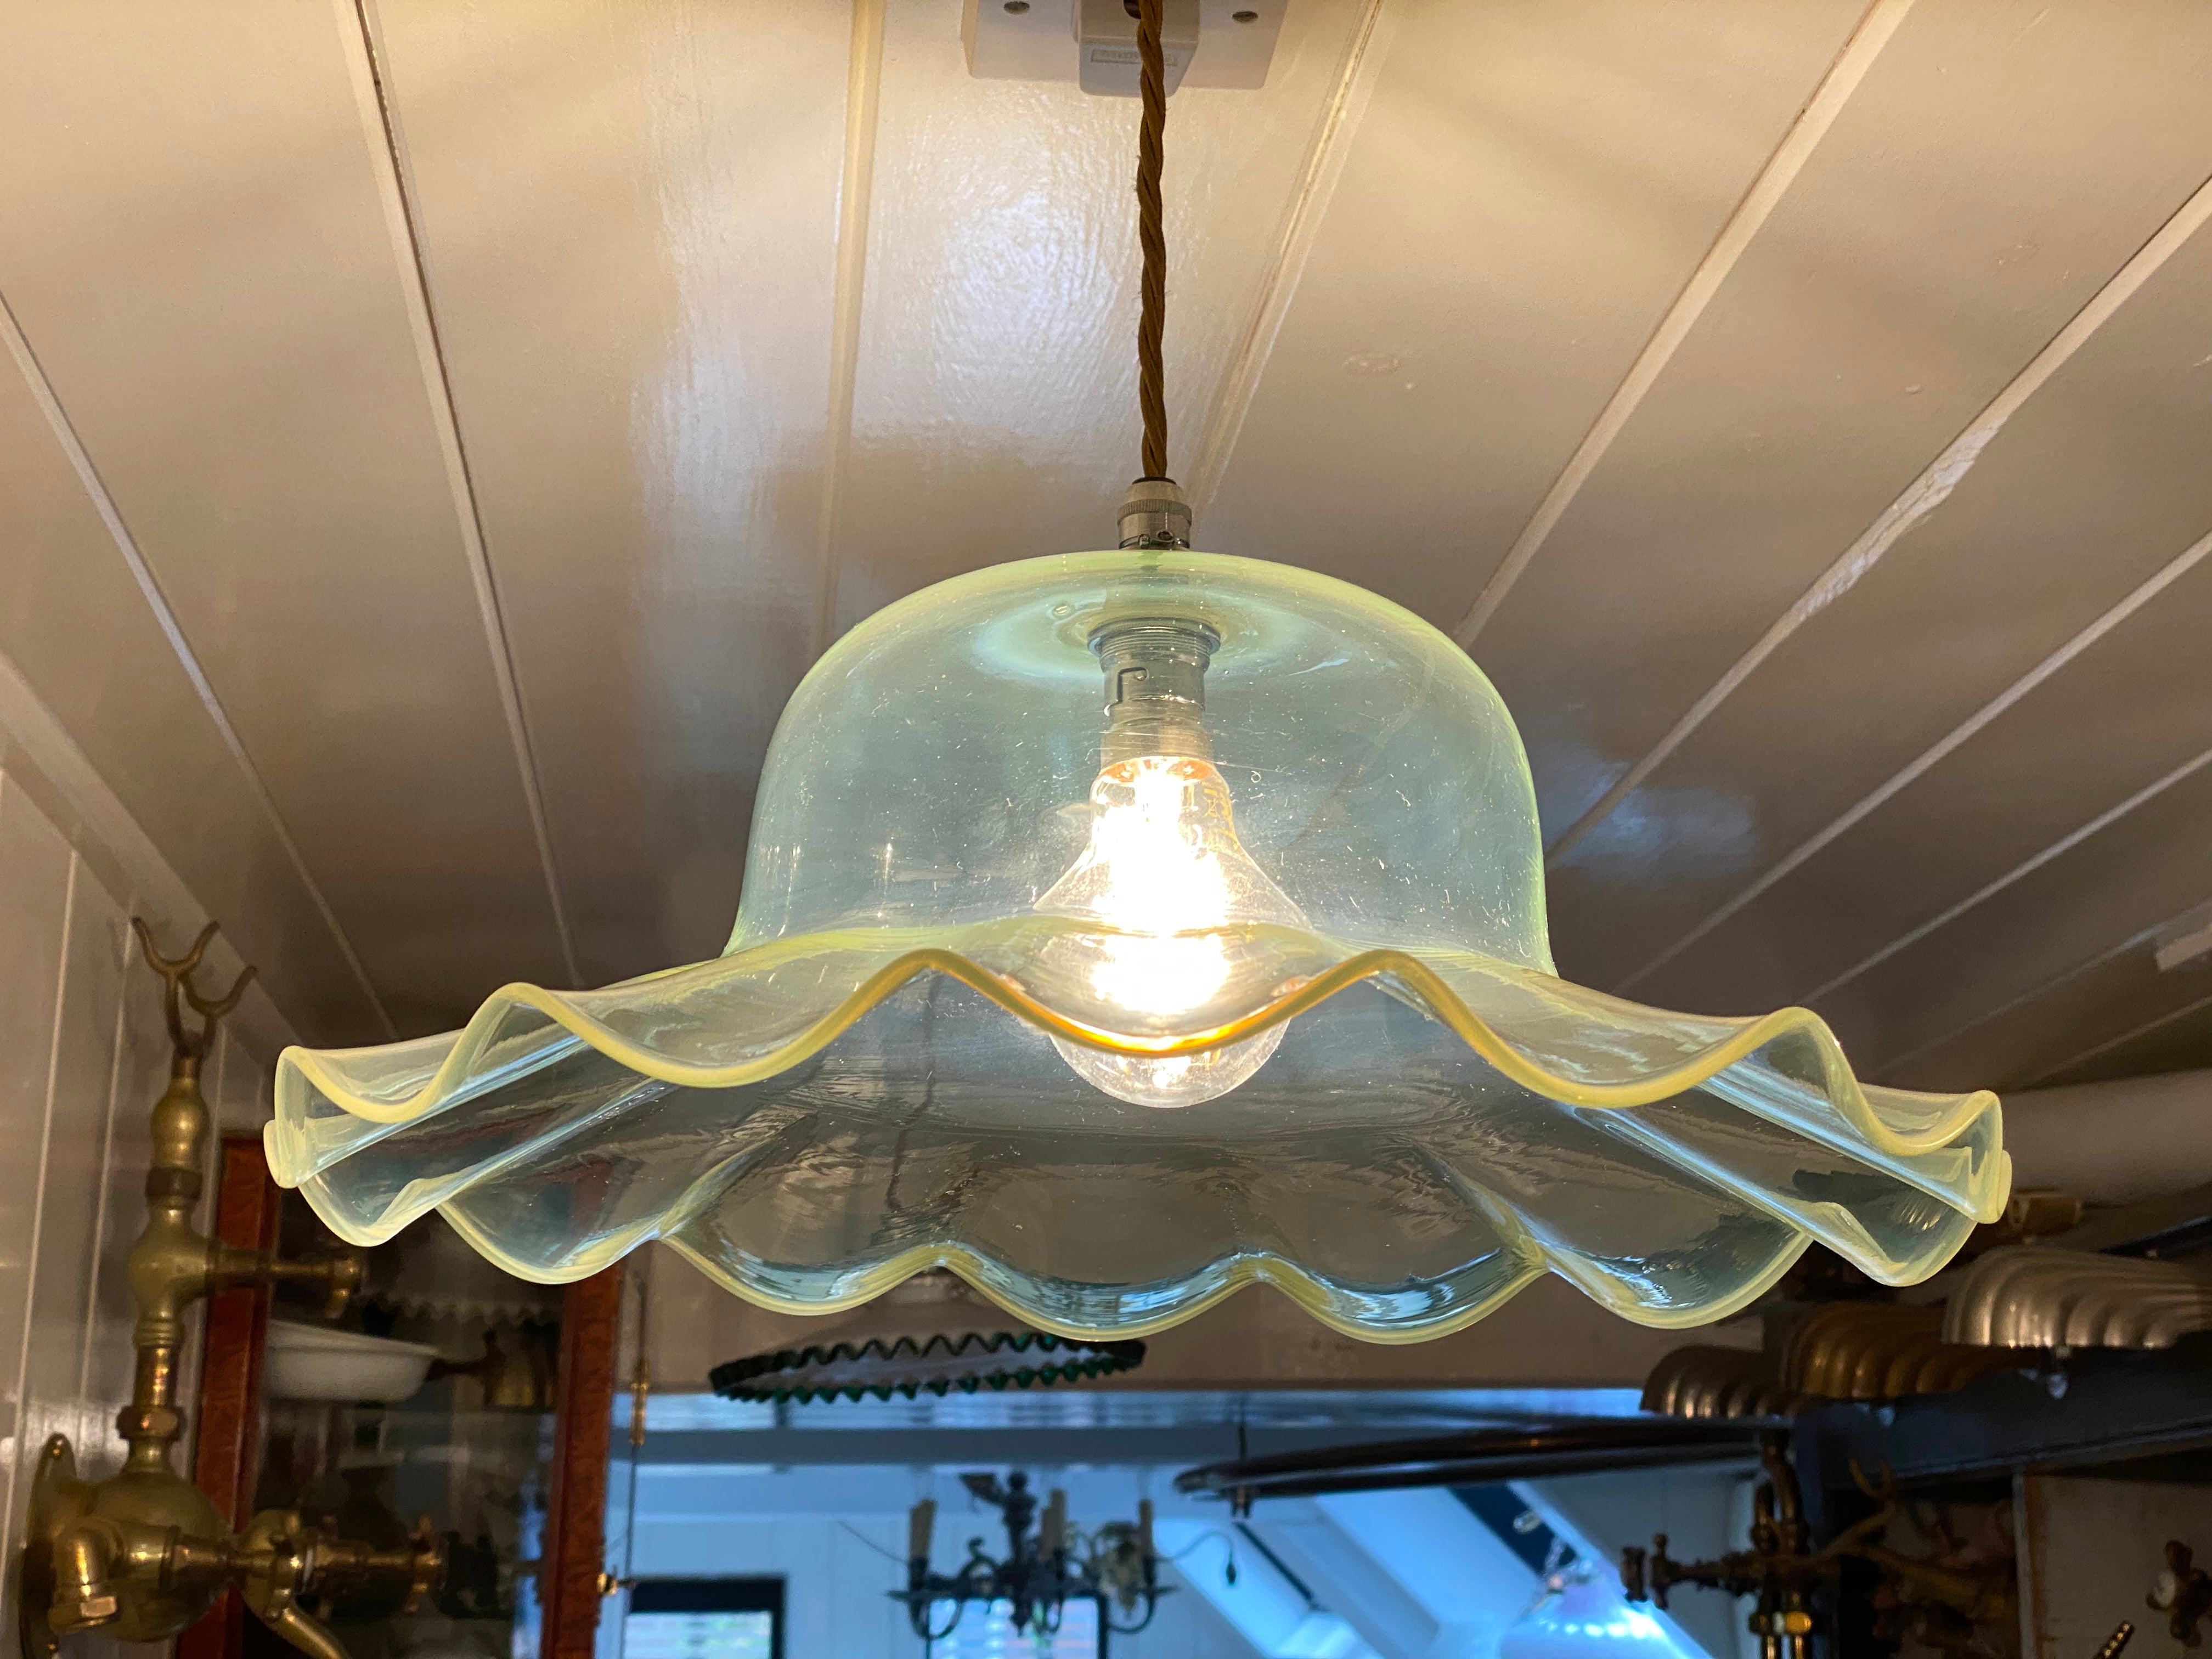 large vaseline pendant lampshade possibly 1970s